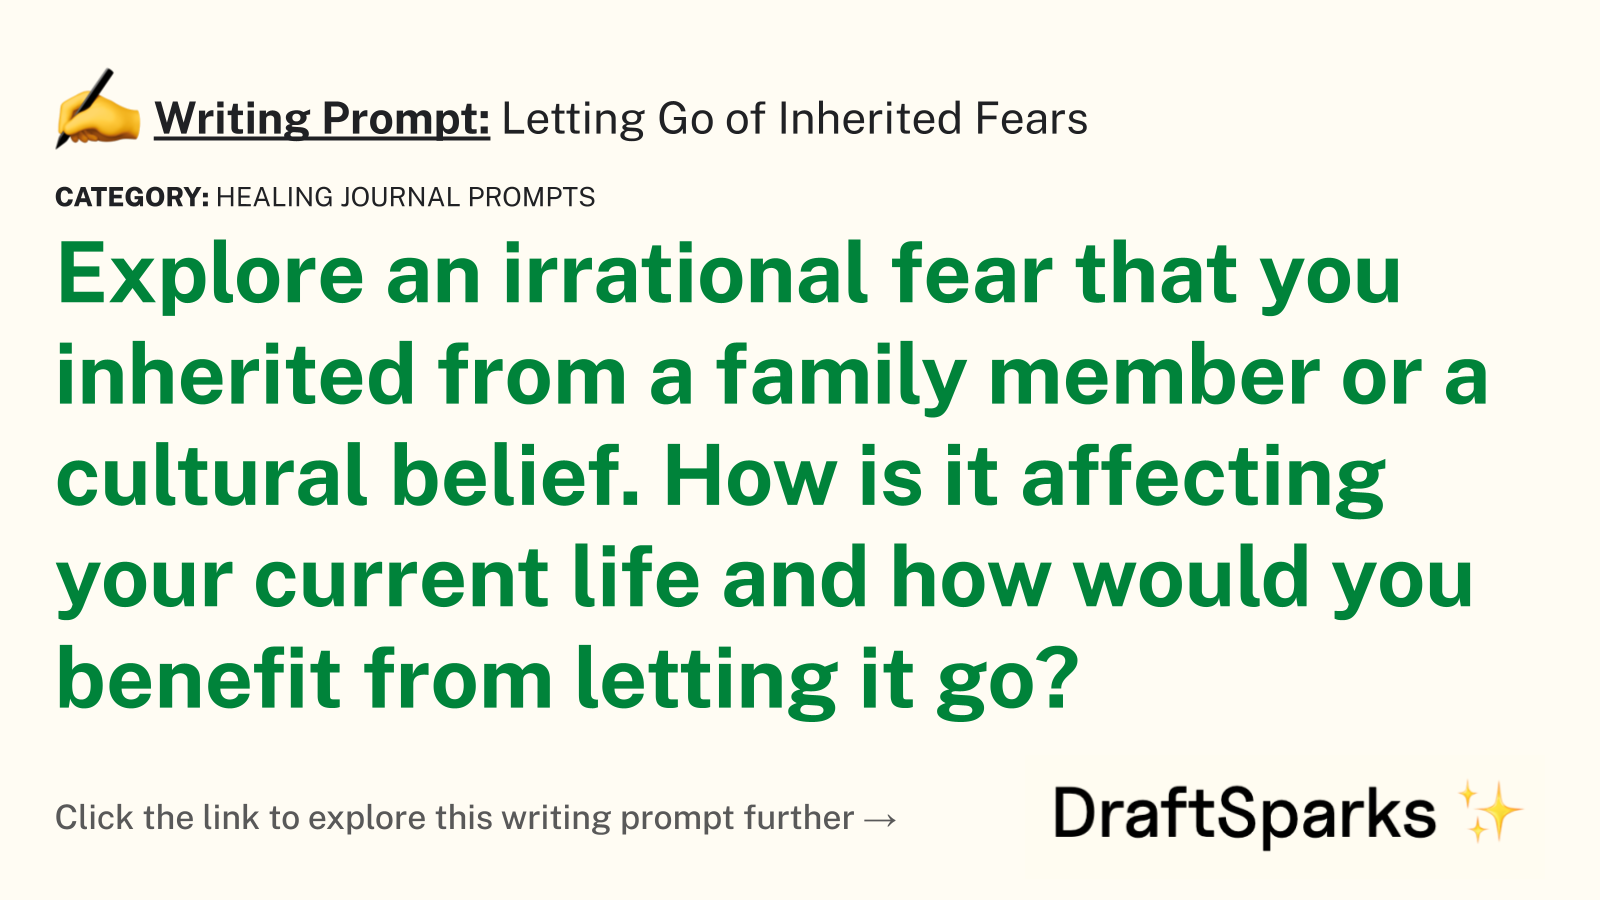 Letting Go of Inherited Fears